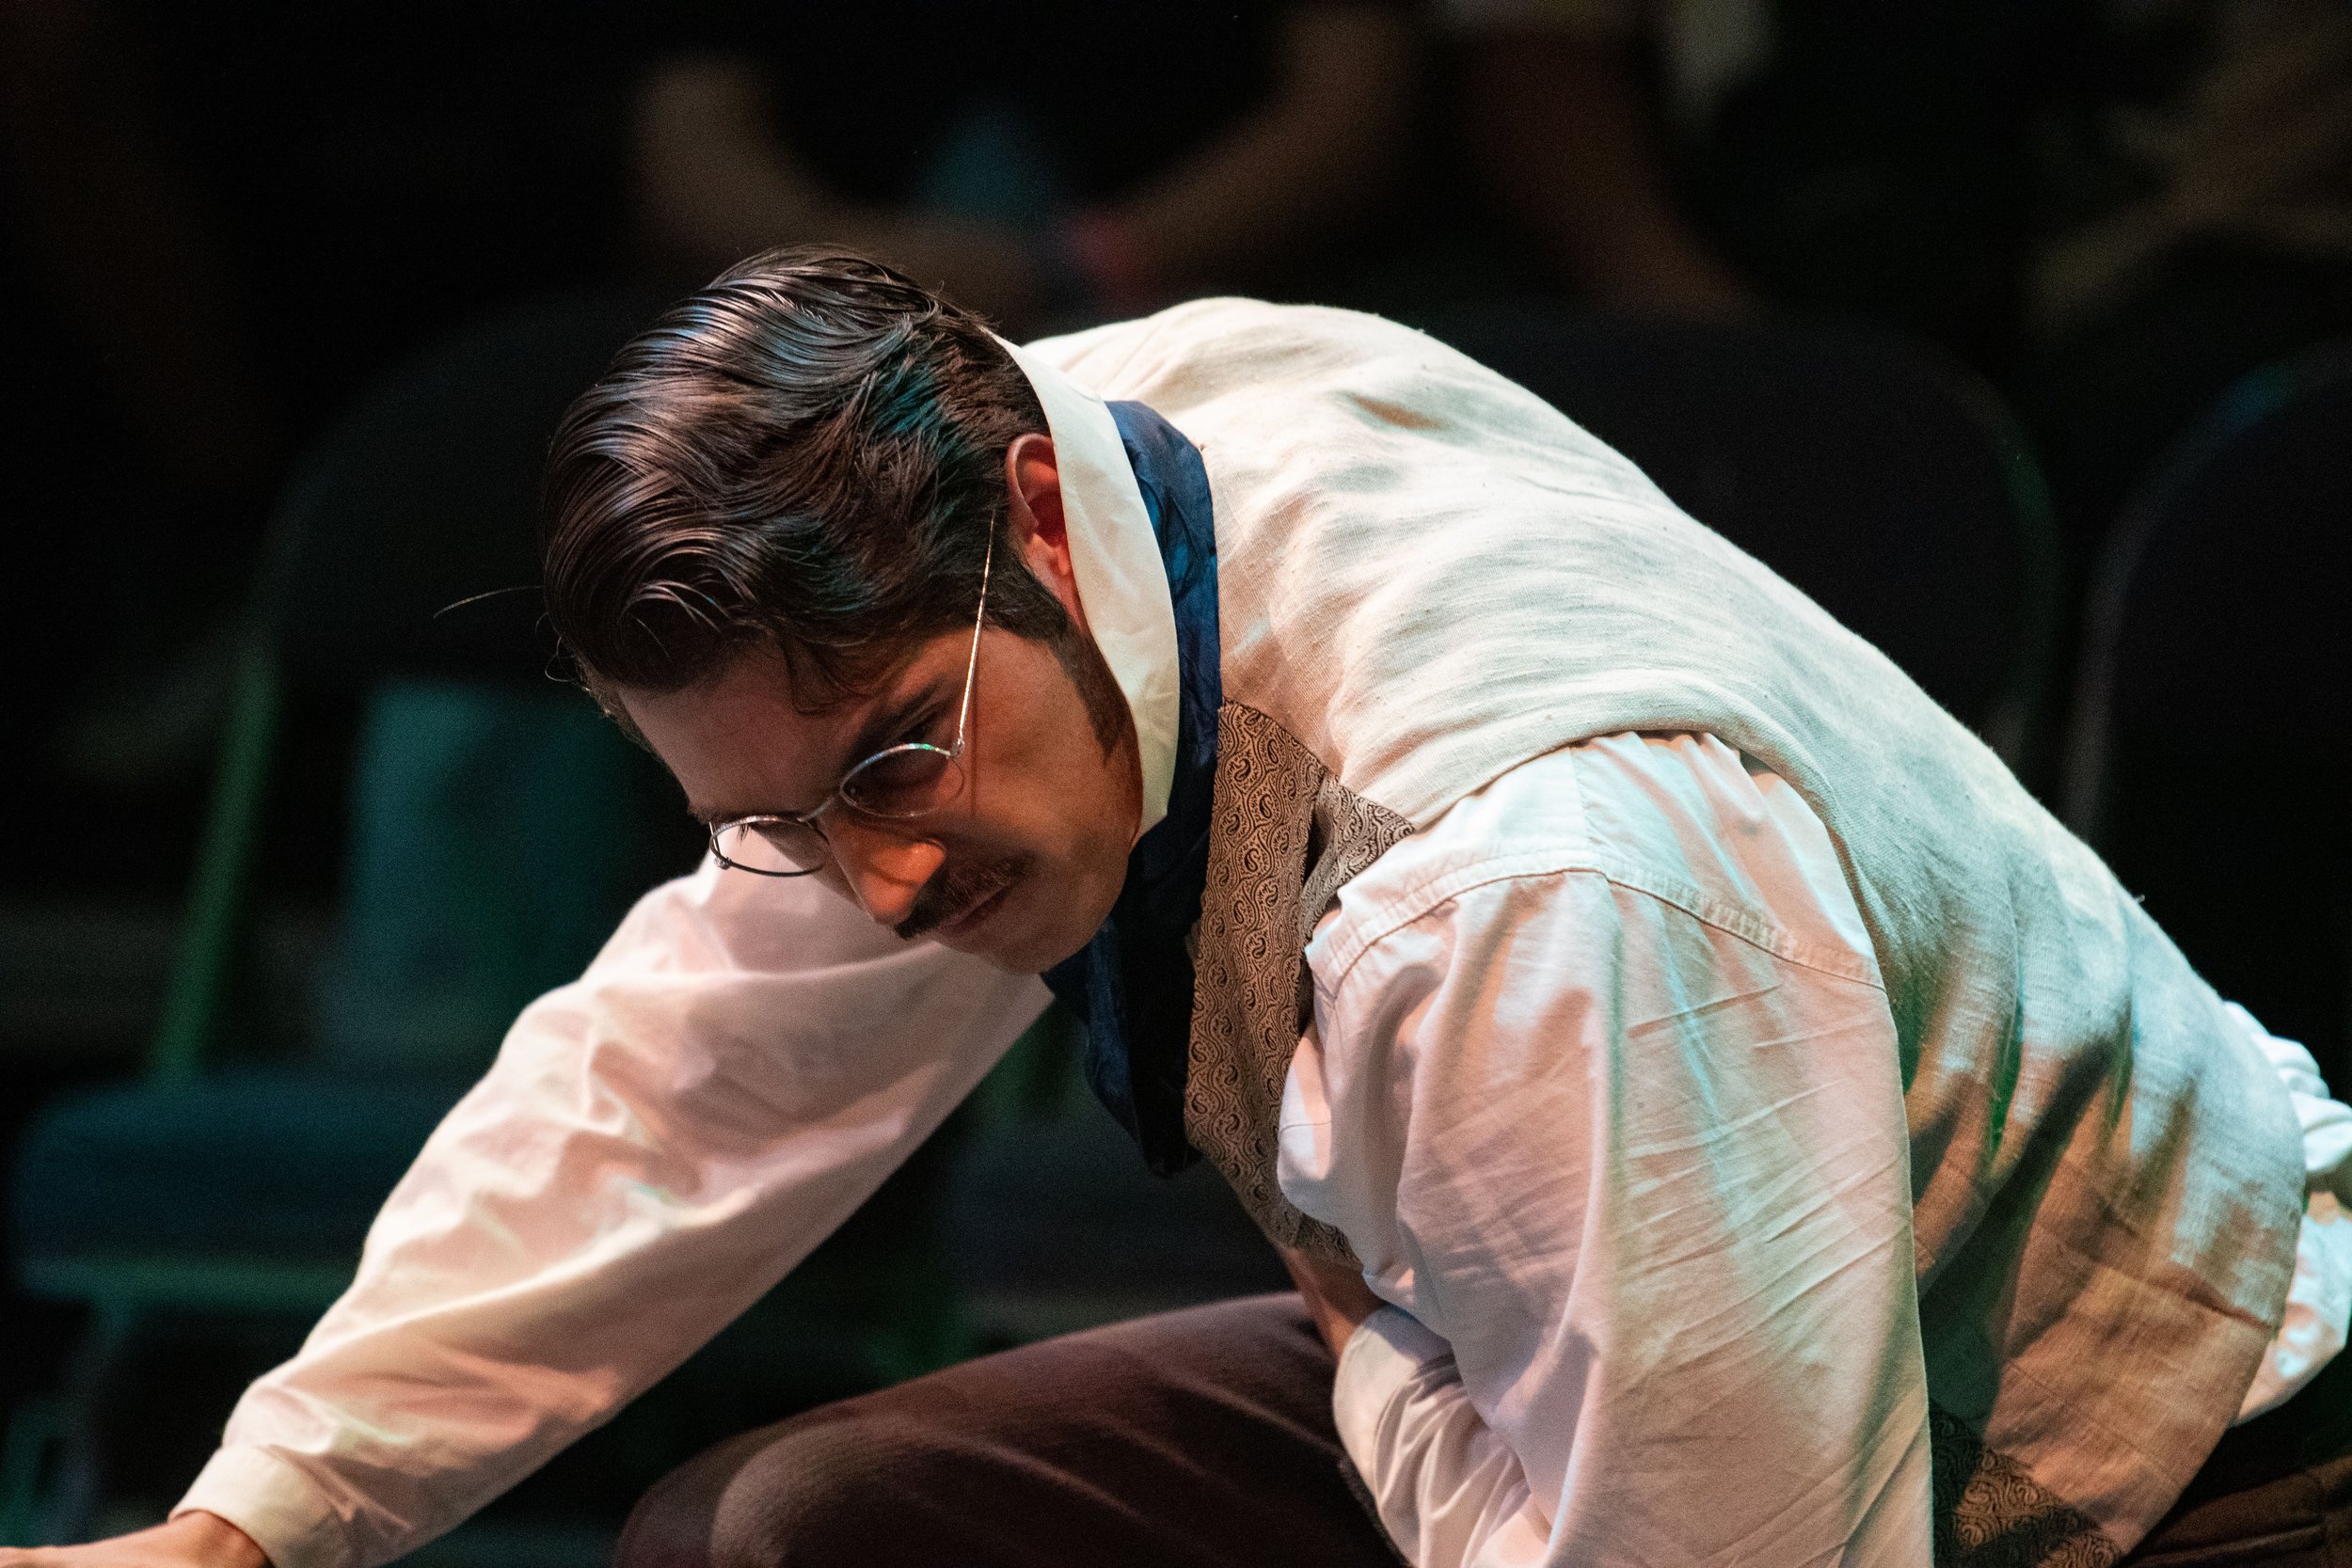  Ryan Dylan Wargnier, playing Frankenstein himself, expresses profound grief as a result of his creature's deeds in G. Bruce Smith's "Broken Mirror: A Frankenstein Odyssey" (dir. Perviz Sawoski), a performance put on by the Theatre Arts Department on